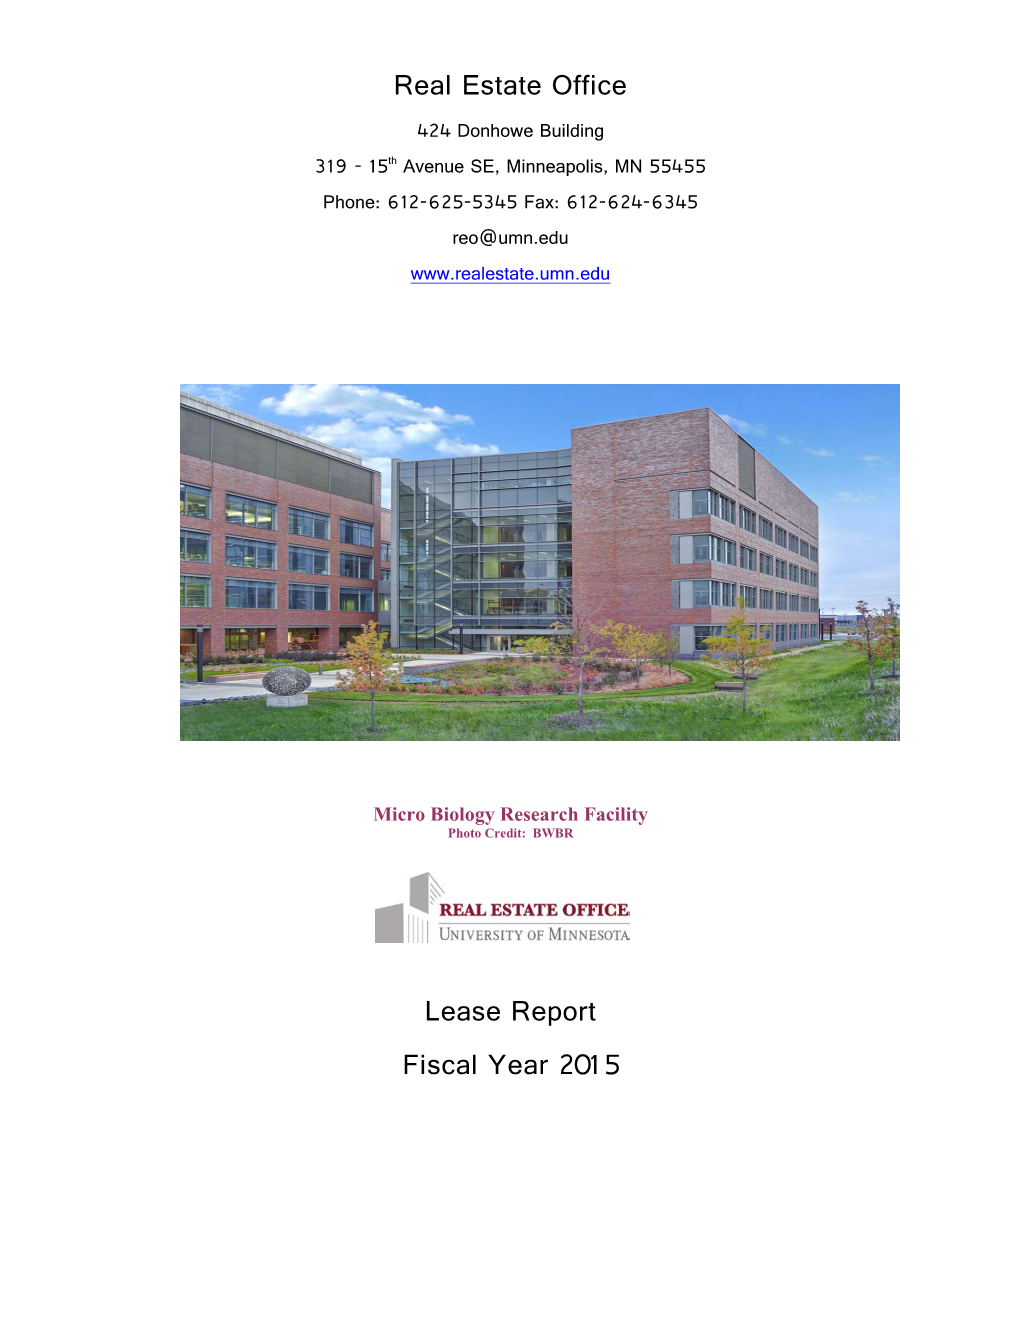 Real Estate Office Lease Report Fiscal Year 2015